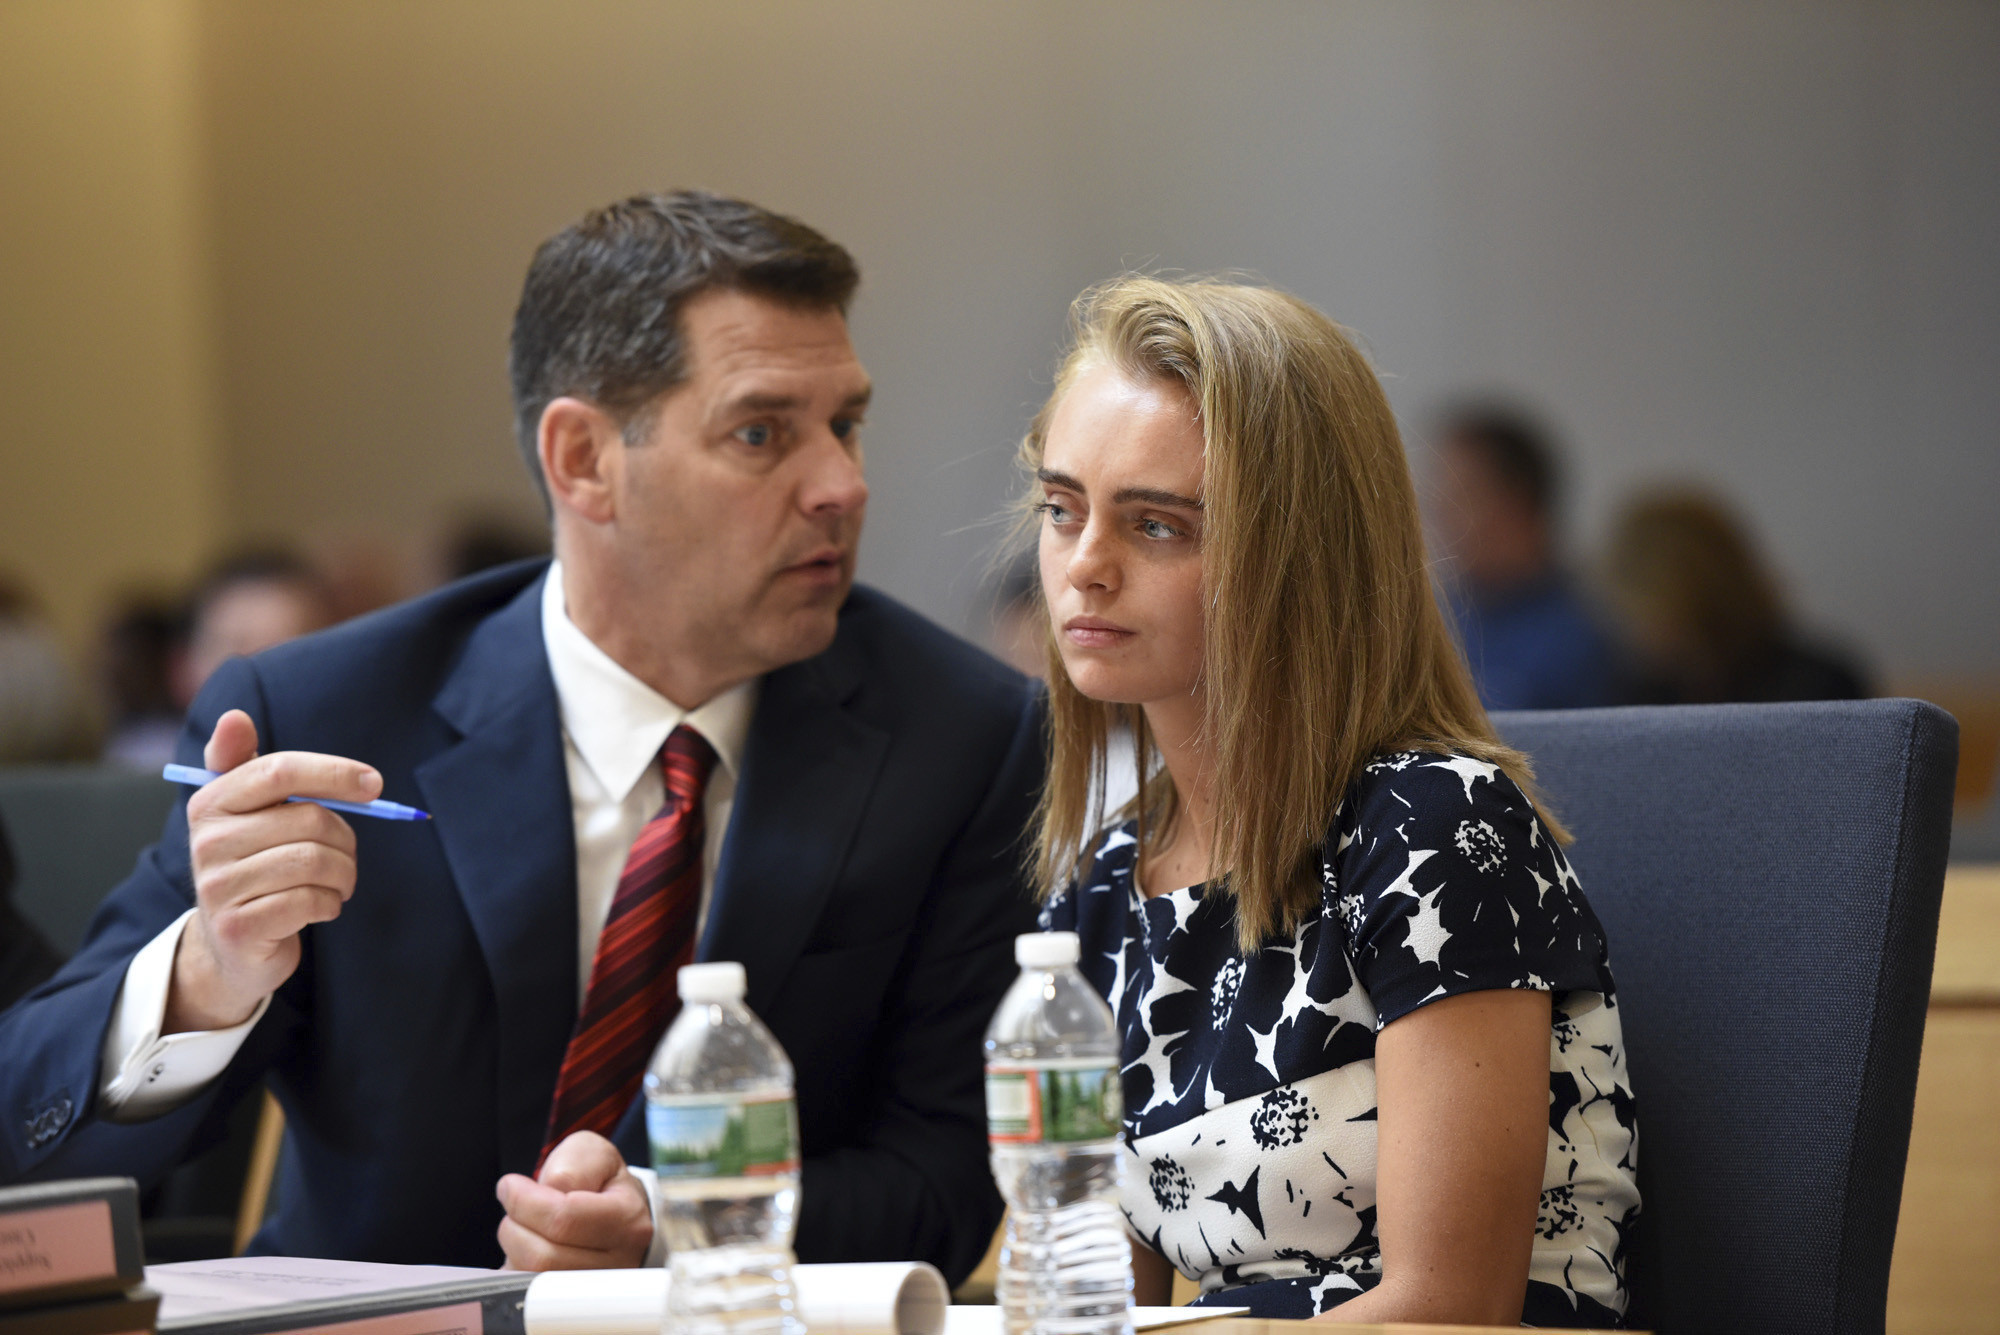 Can words kill? Michelle Carter on trial for urging her 18-year-old boyfriend to kill ...